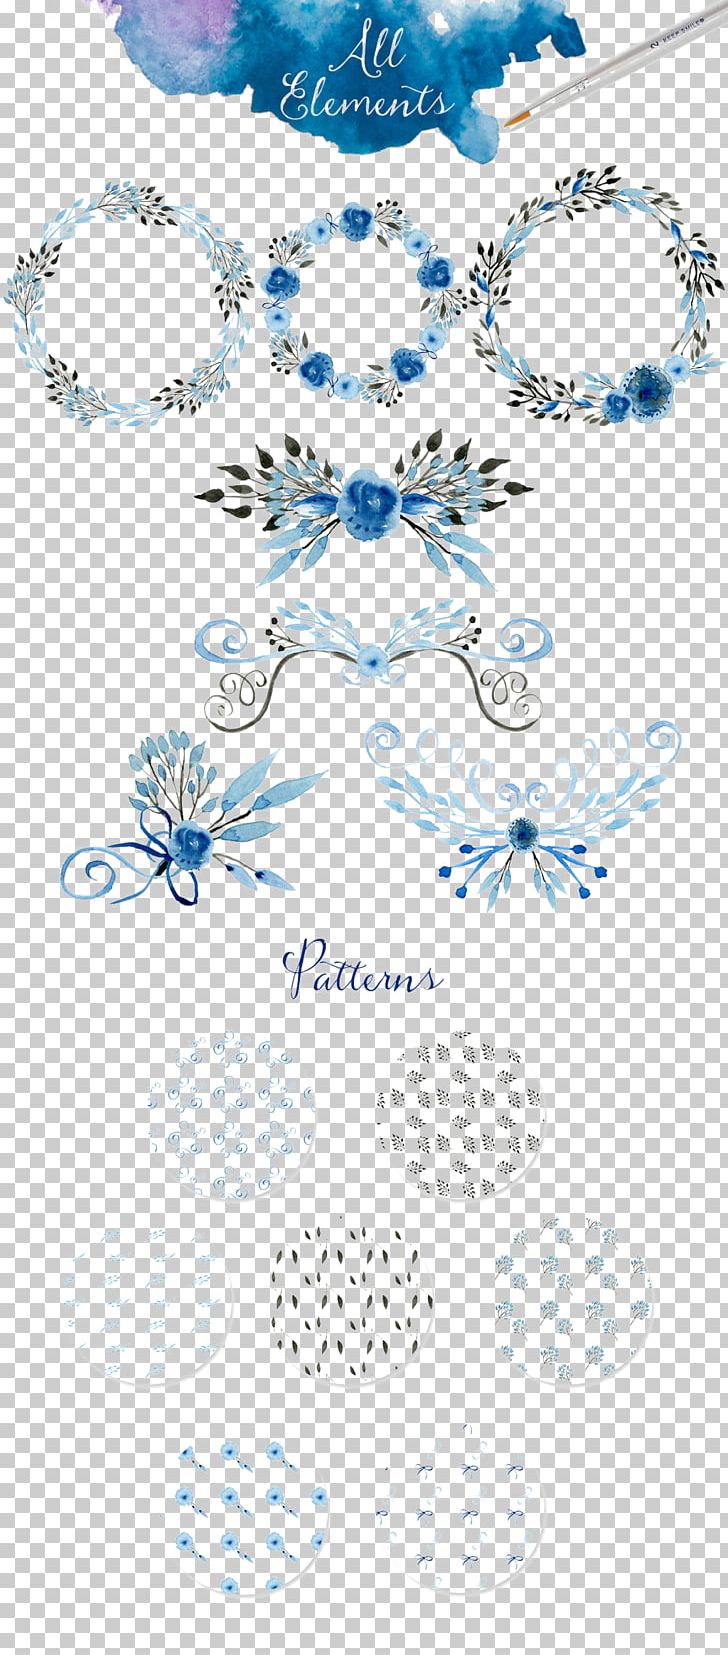 Watercolor Painting Wedding Invitation PNG, Clipart, Beautiful, Beauty Salon, Black And White, Blue, Border Free PNG Download